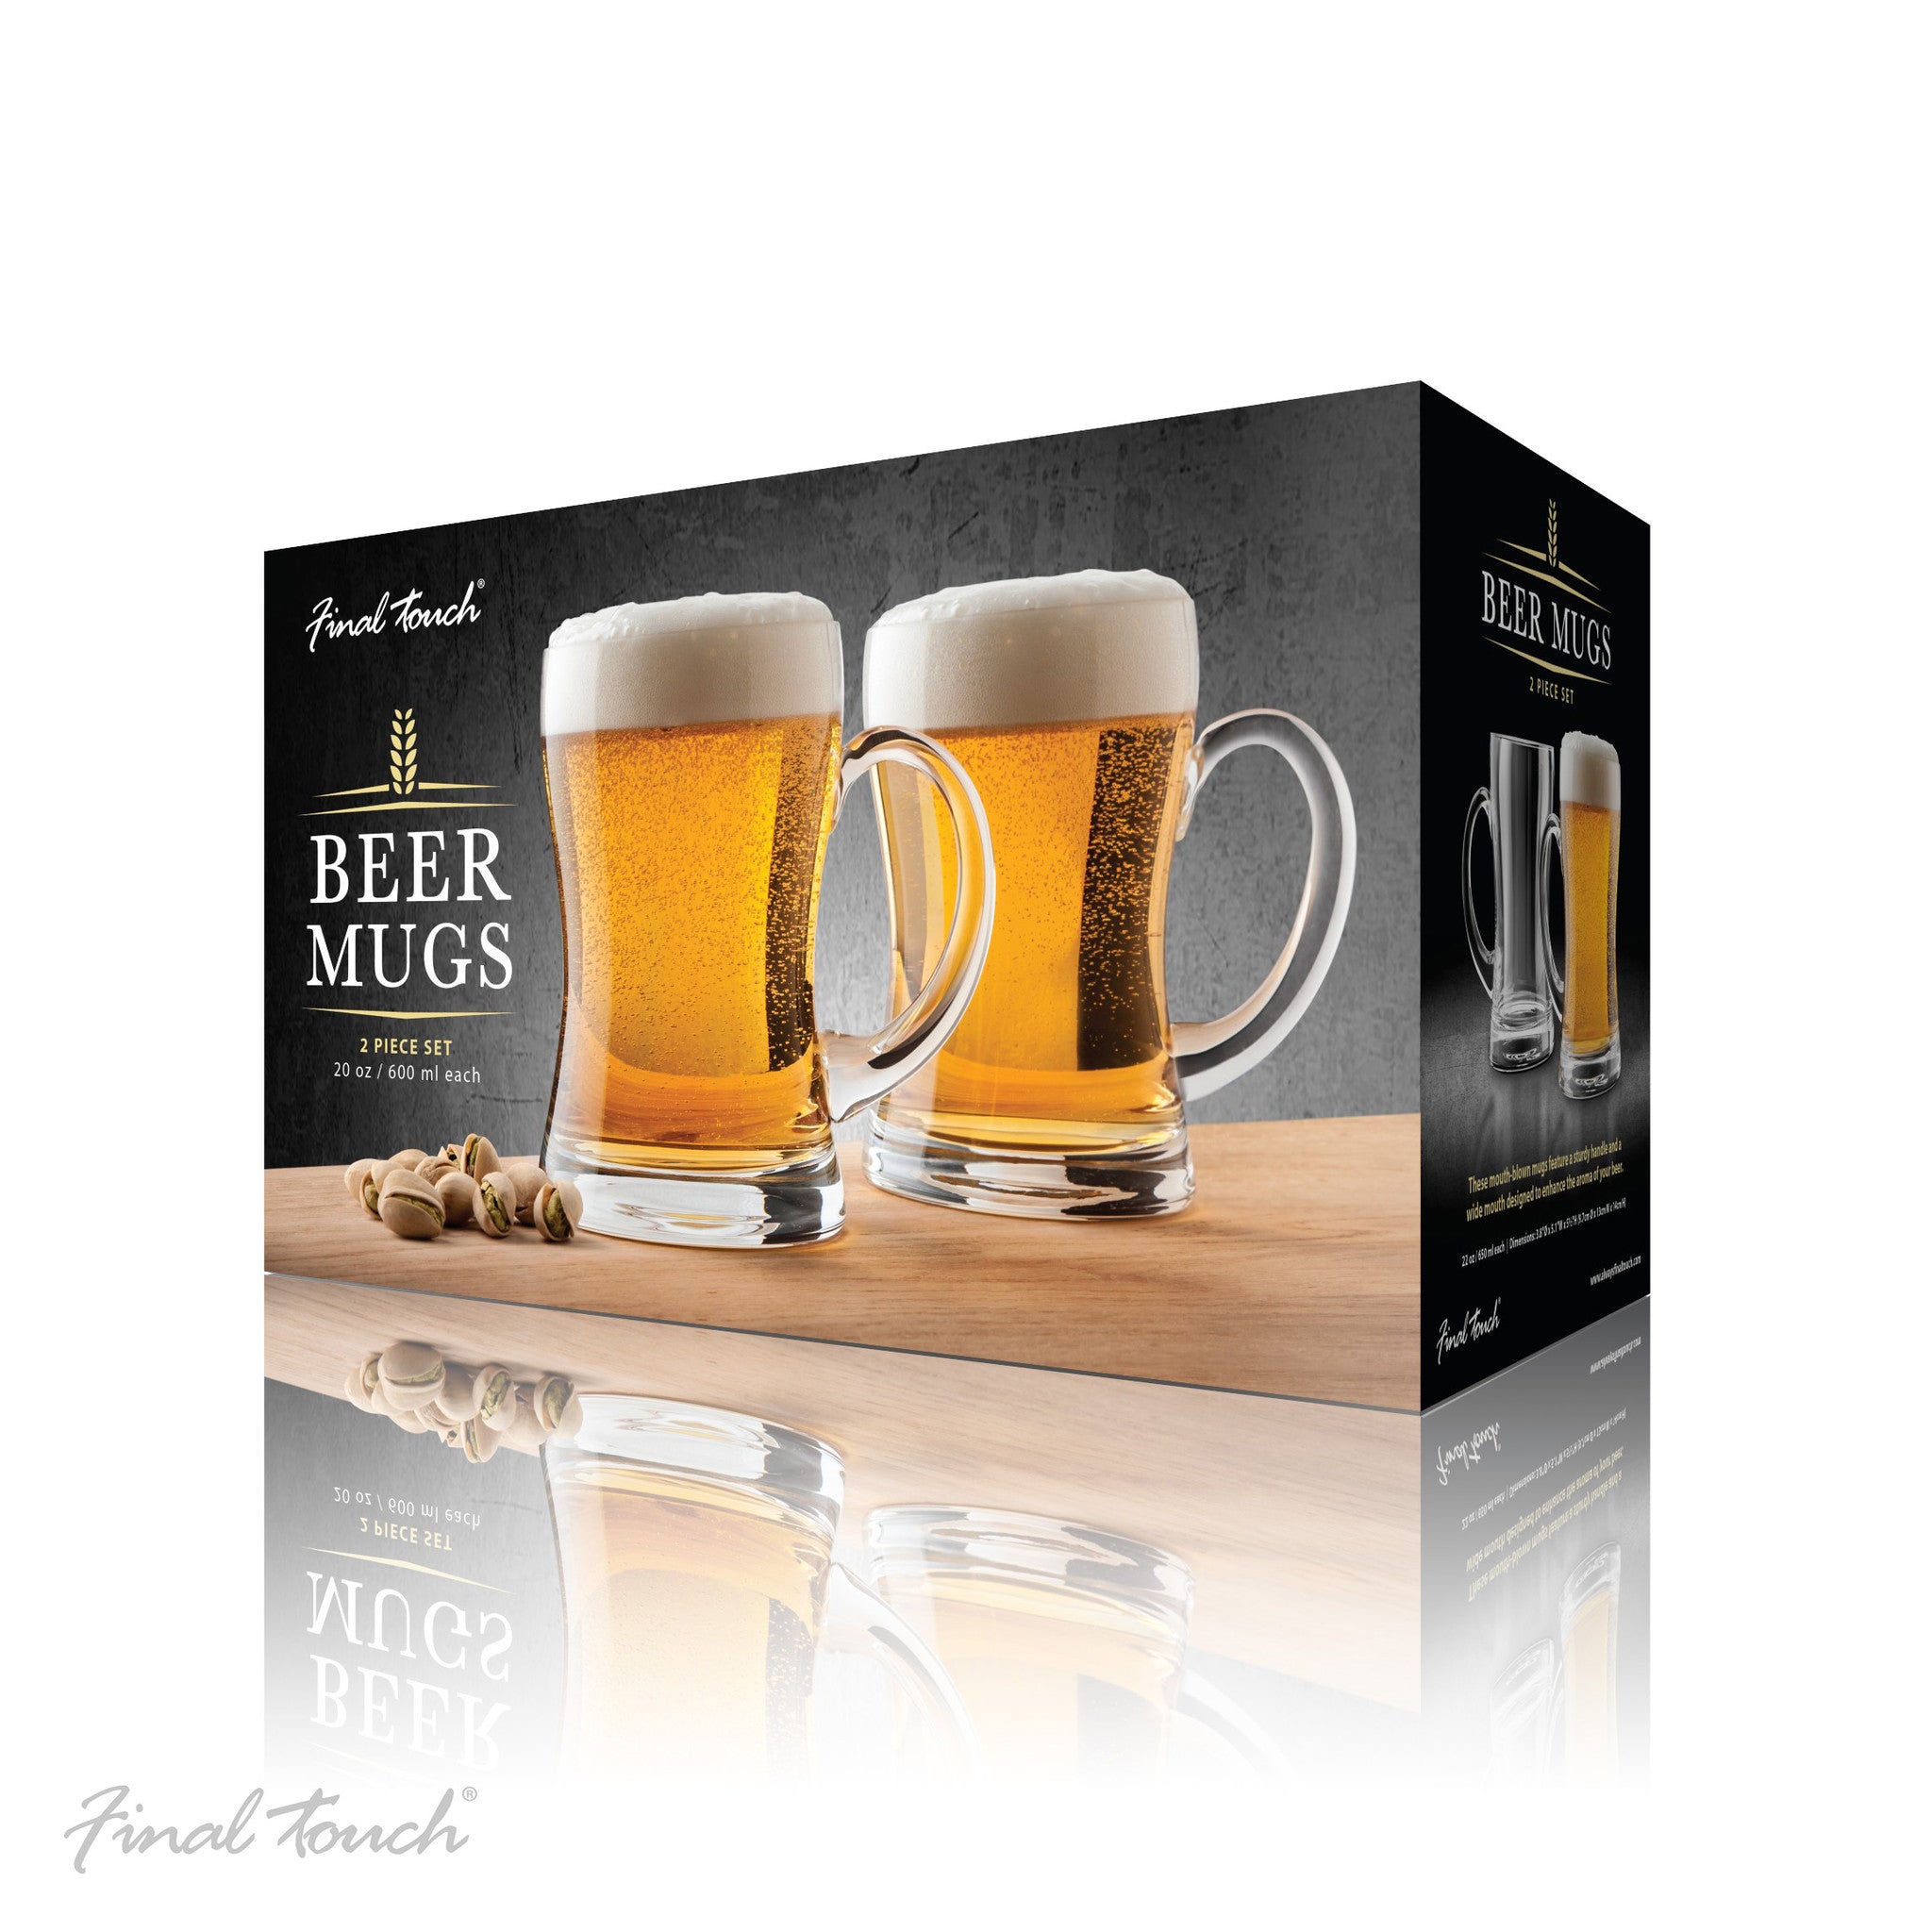 Final Touch Mouth Blown Beer Mugs